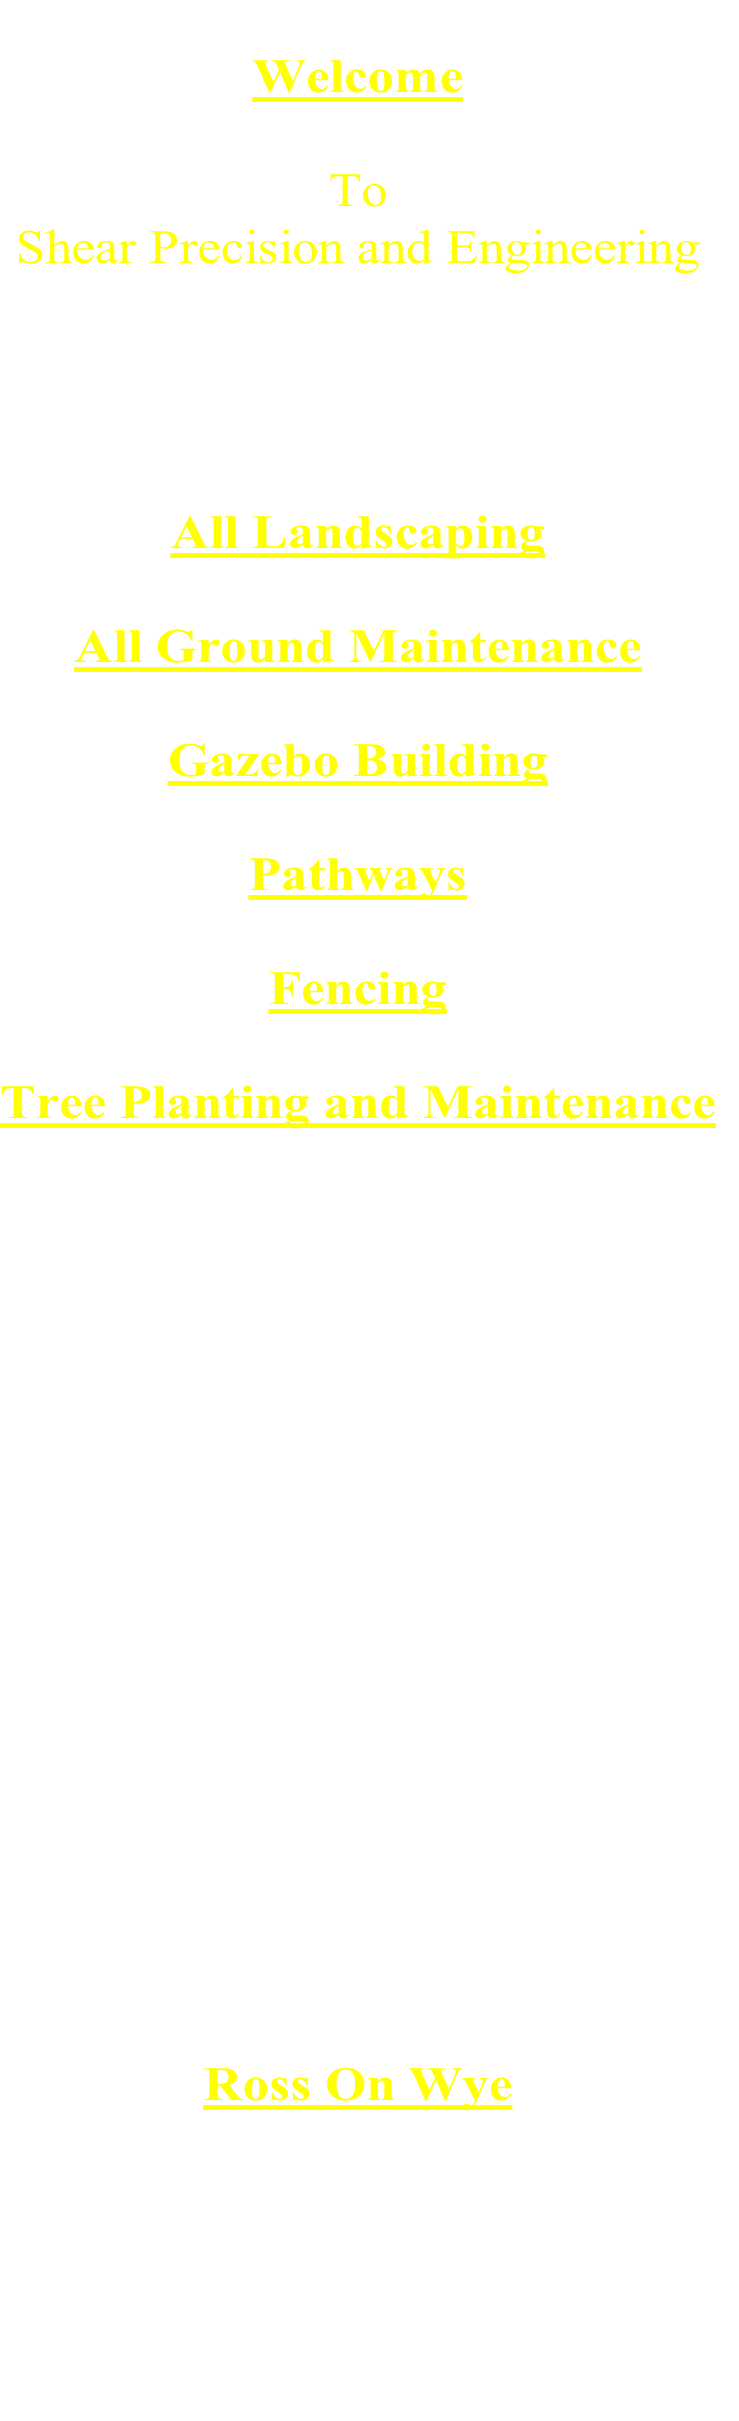 
Welcome

To 
Shear Precision and Engineering




All Landscaping

All Ground Maintenance

Gazebo Building

Pathways

Fencing

Tree Planting and Maintenance





























Ross On Wye

5 Stowfield Cable Works
Lydbrook
Gloucester
GL17 9NG

